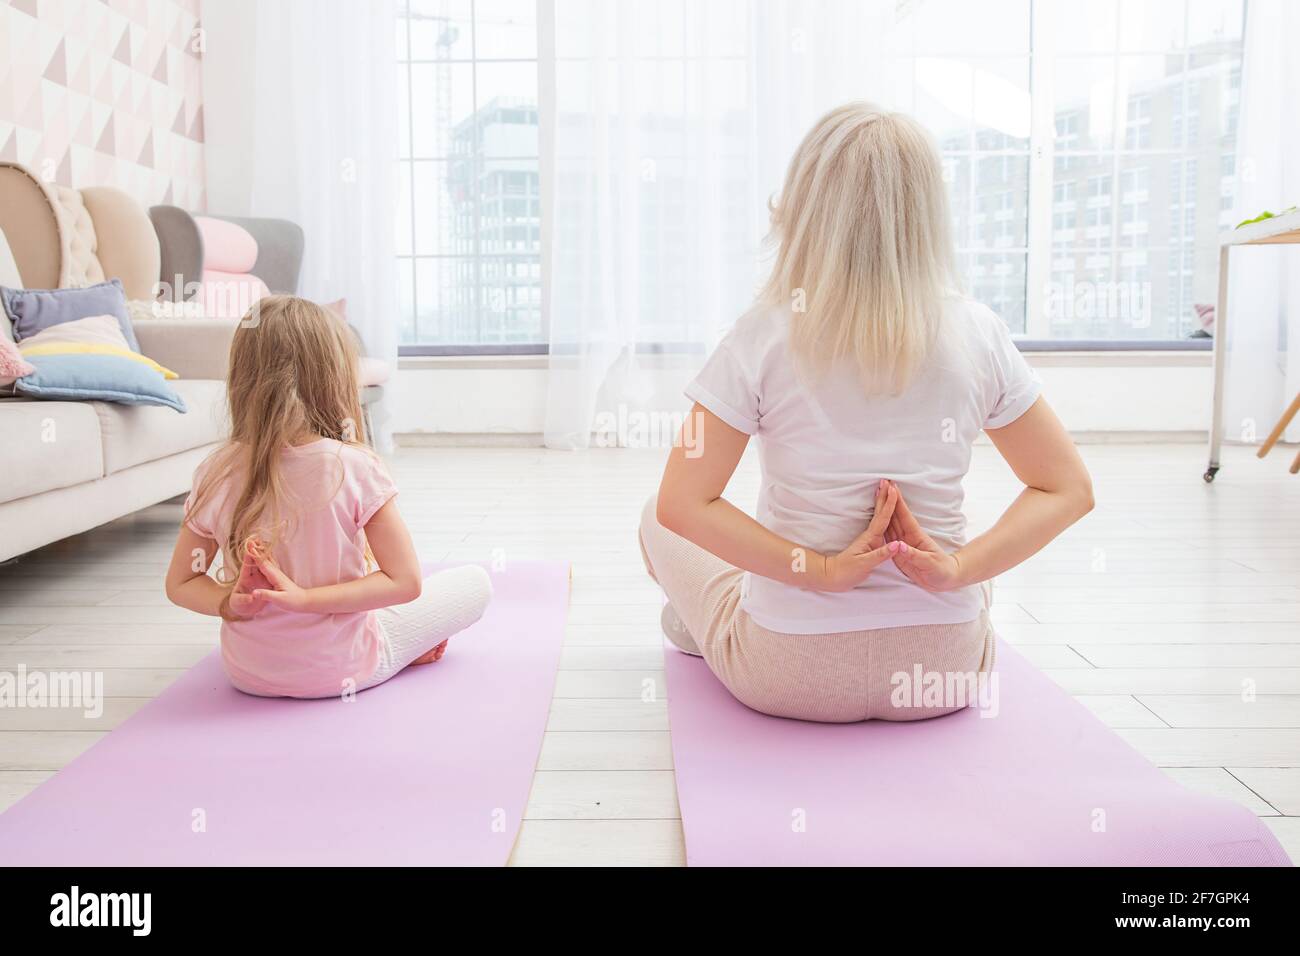 https://c8.alamy.com/comp/2F7GPK4/full-length-back-side-view-smiling-blond-mother-on-yoga-mat-with-cute-playful-little-preschool-daughter-do-various-exercises-happy-mommy-practicing-y-2F7GPK4.jpg